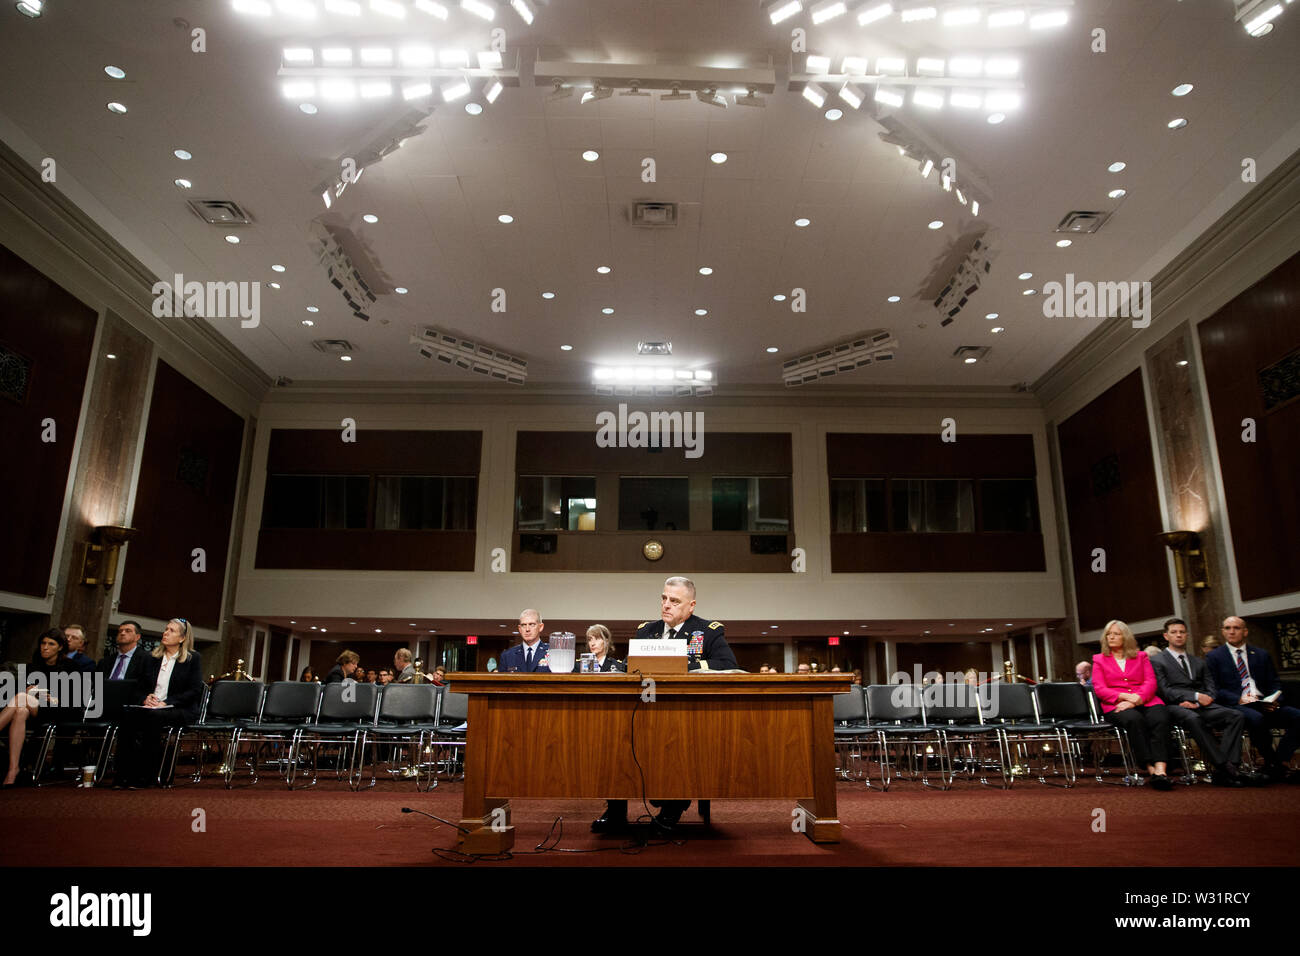 (190711) -- WASHINGTON, July 11, 2019 (Xinhua) -- Gen. Mark Milley testifies before the Senate Arms Services Committee on his nomination to be chairman of the Joint Chiefs of Staff on Capitol Hill in Washington D.C., the United States, on July 11, 2019. (Xinhua/Ting Shen) Stock Photo